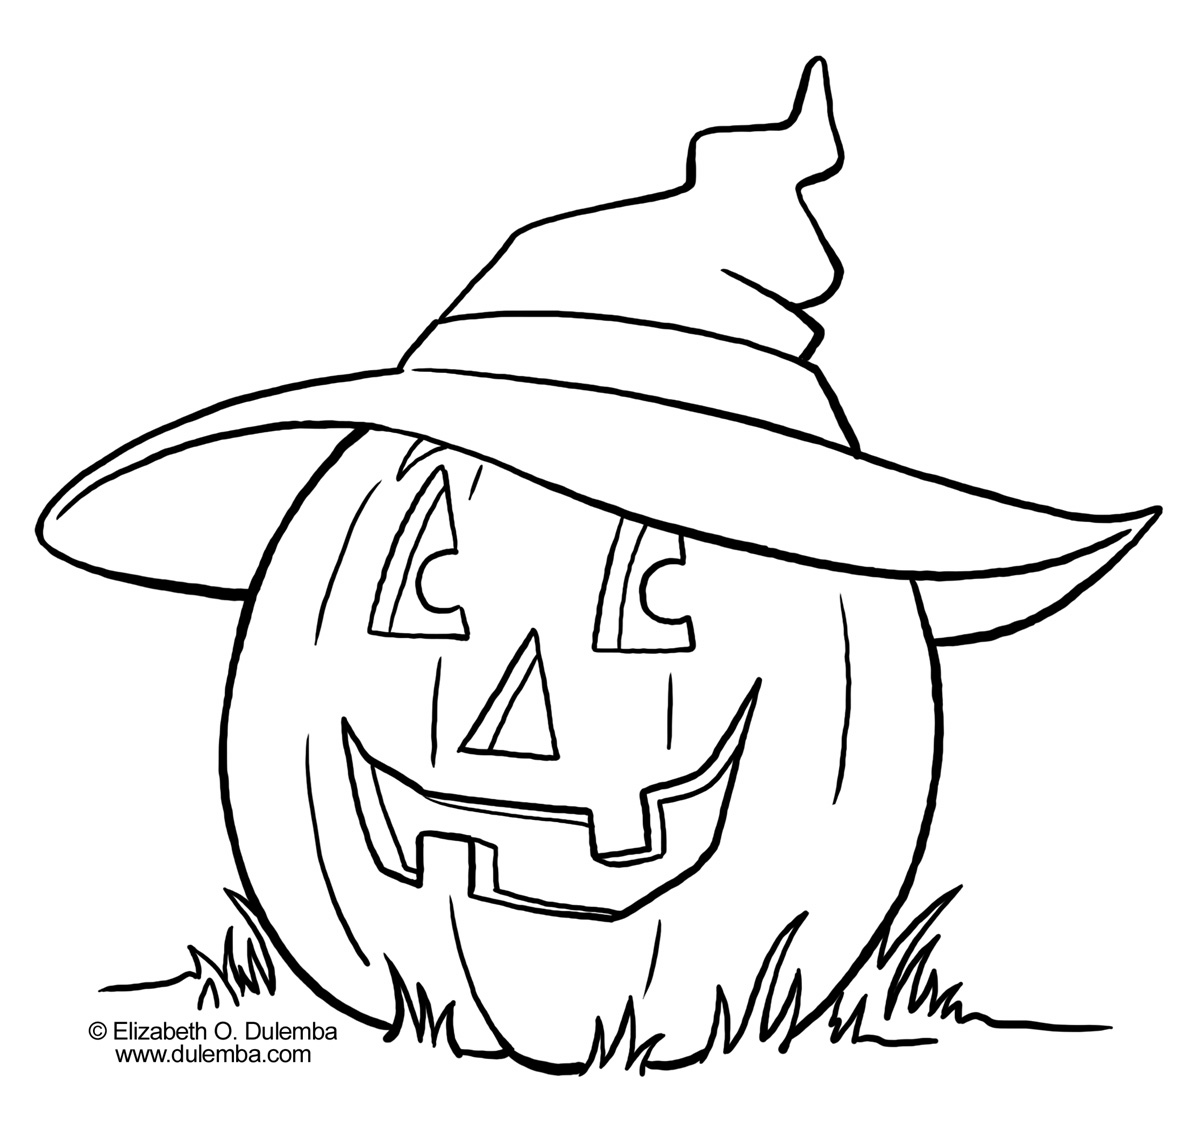 Download transmissionpress: Halloween Coloring Pictures